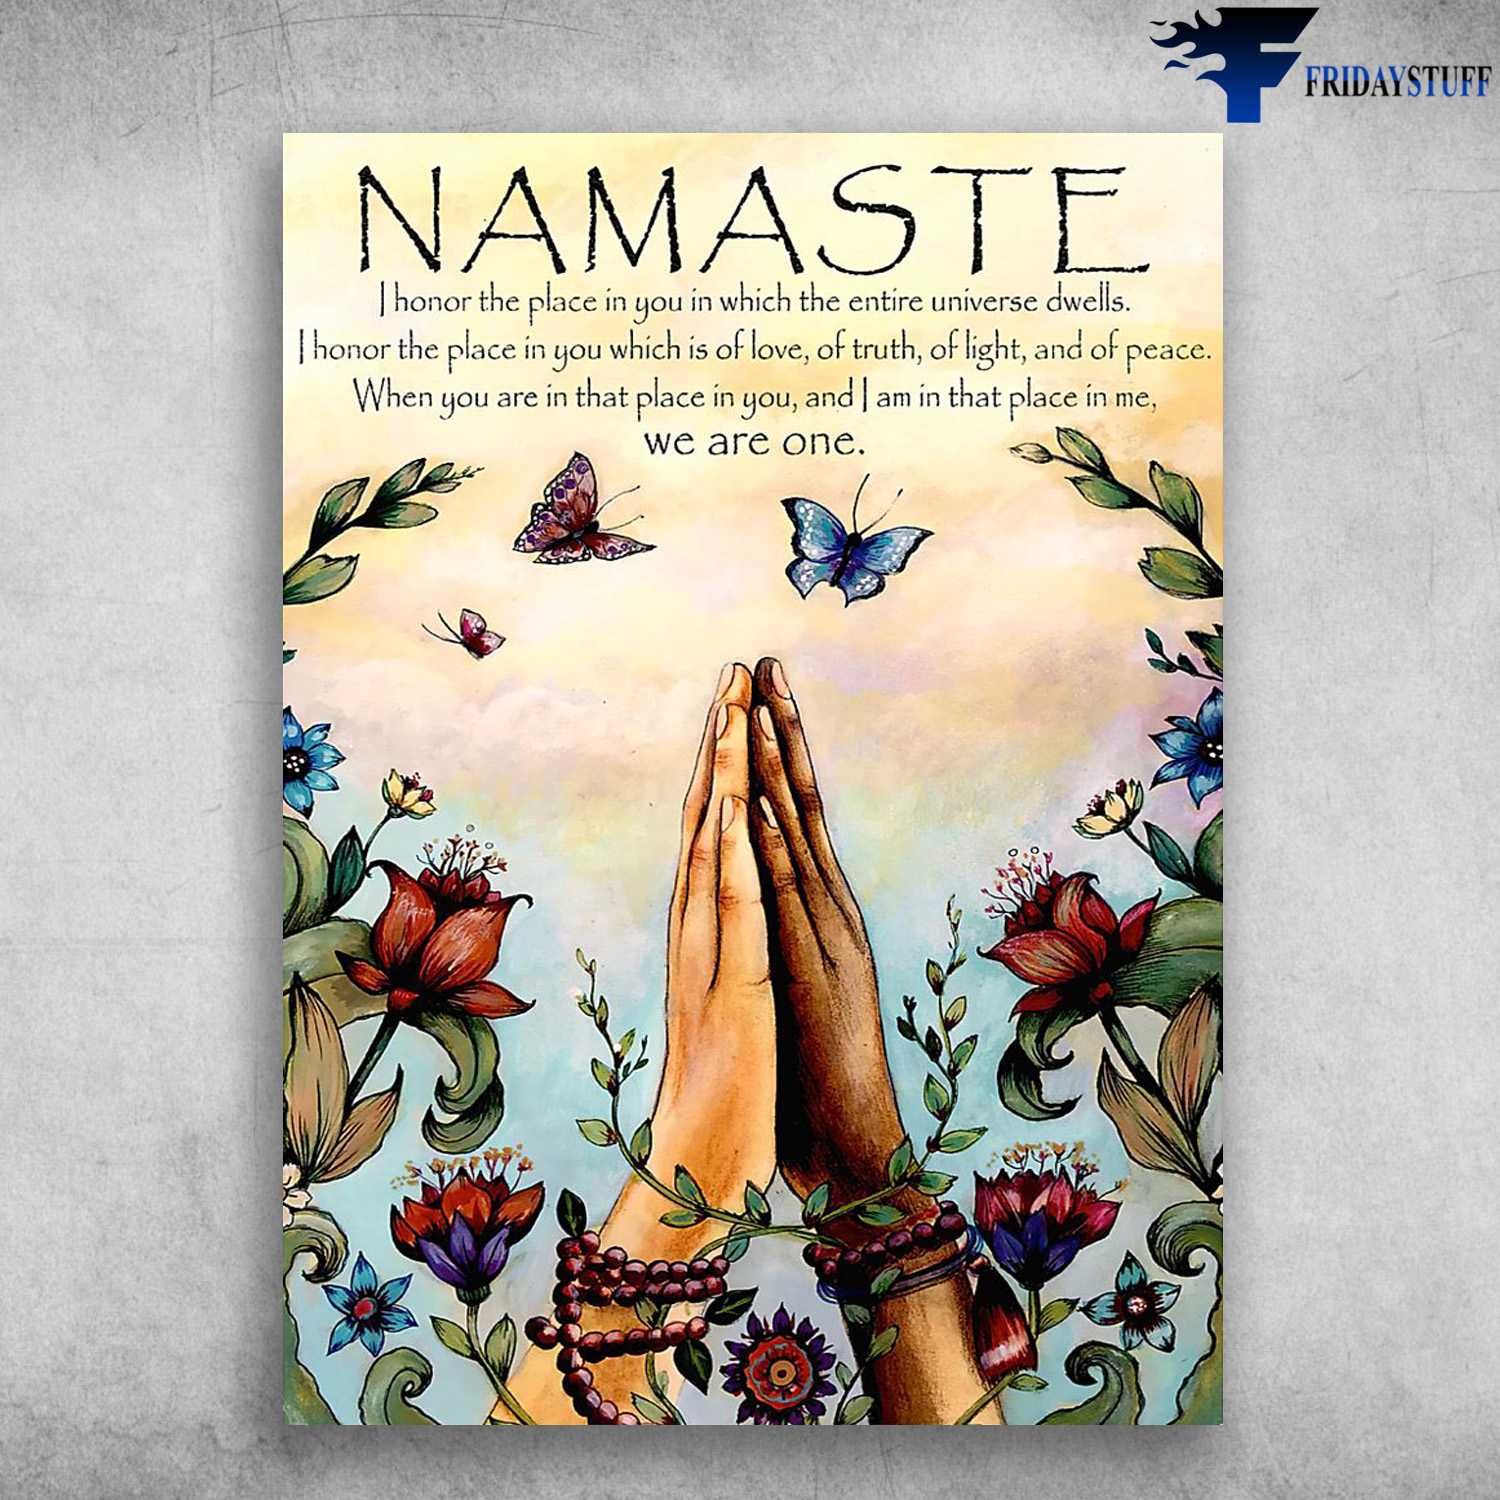 Namaste Poster, I Honor The Place In You, In Which The Entire Universe Dwells, I Honnor The Place In You, Which Is Of Love, Of Truth, Of Light